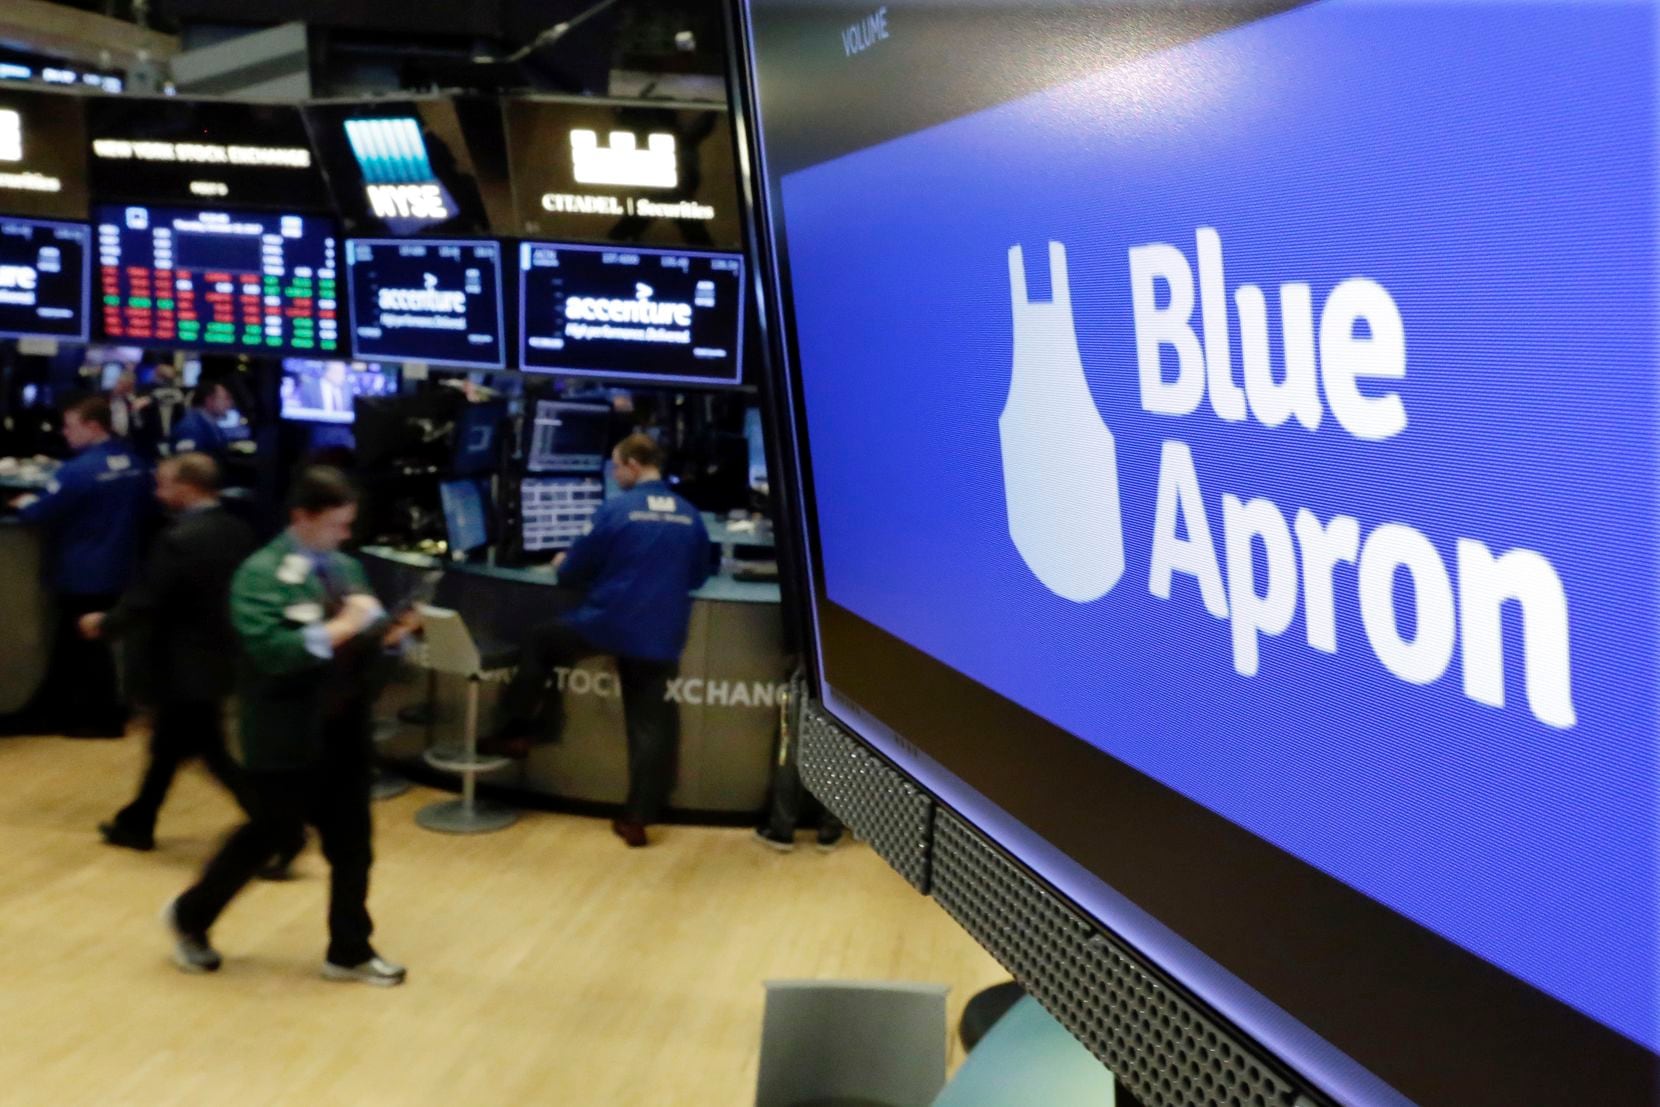 The logo for Blue Apron appears on a screen above the trading floor of the New York Stock Exchange in a 2017 file photo.